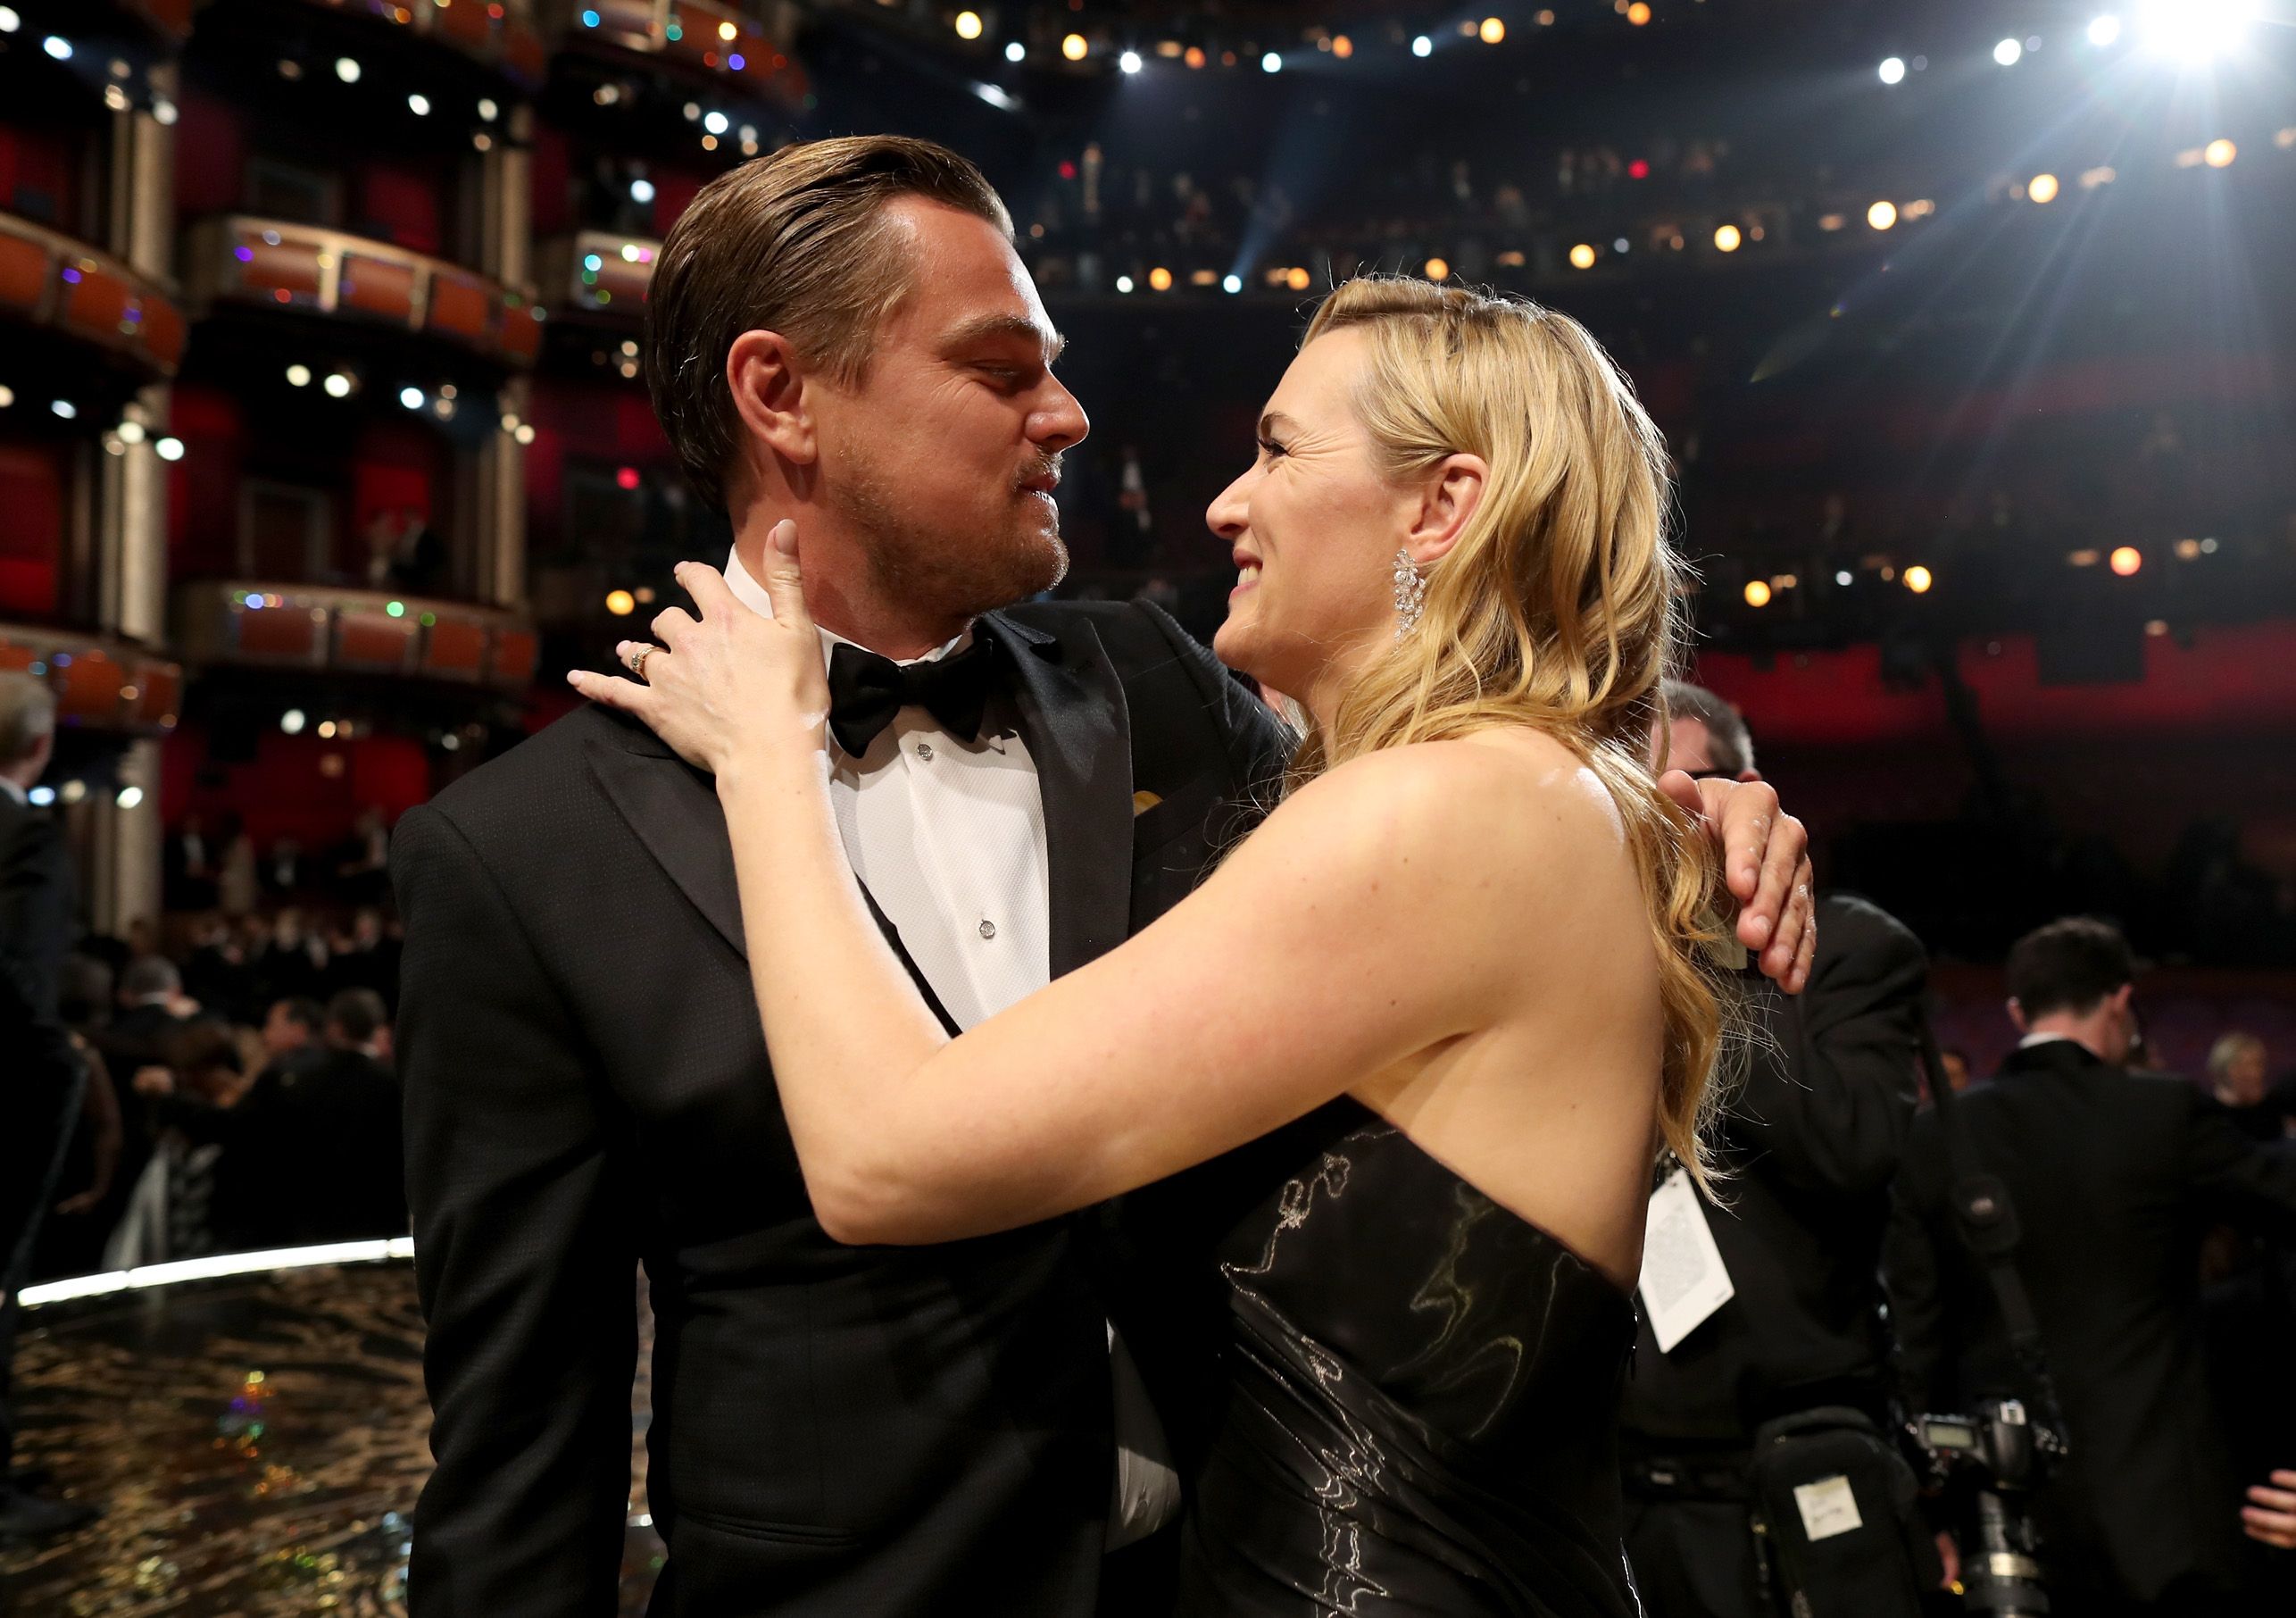 Yes, Kate Winslet and Leonardo DiCaprio Quote 'Titanic' to Each Other